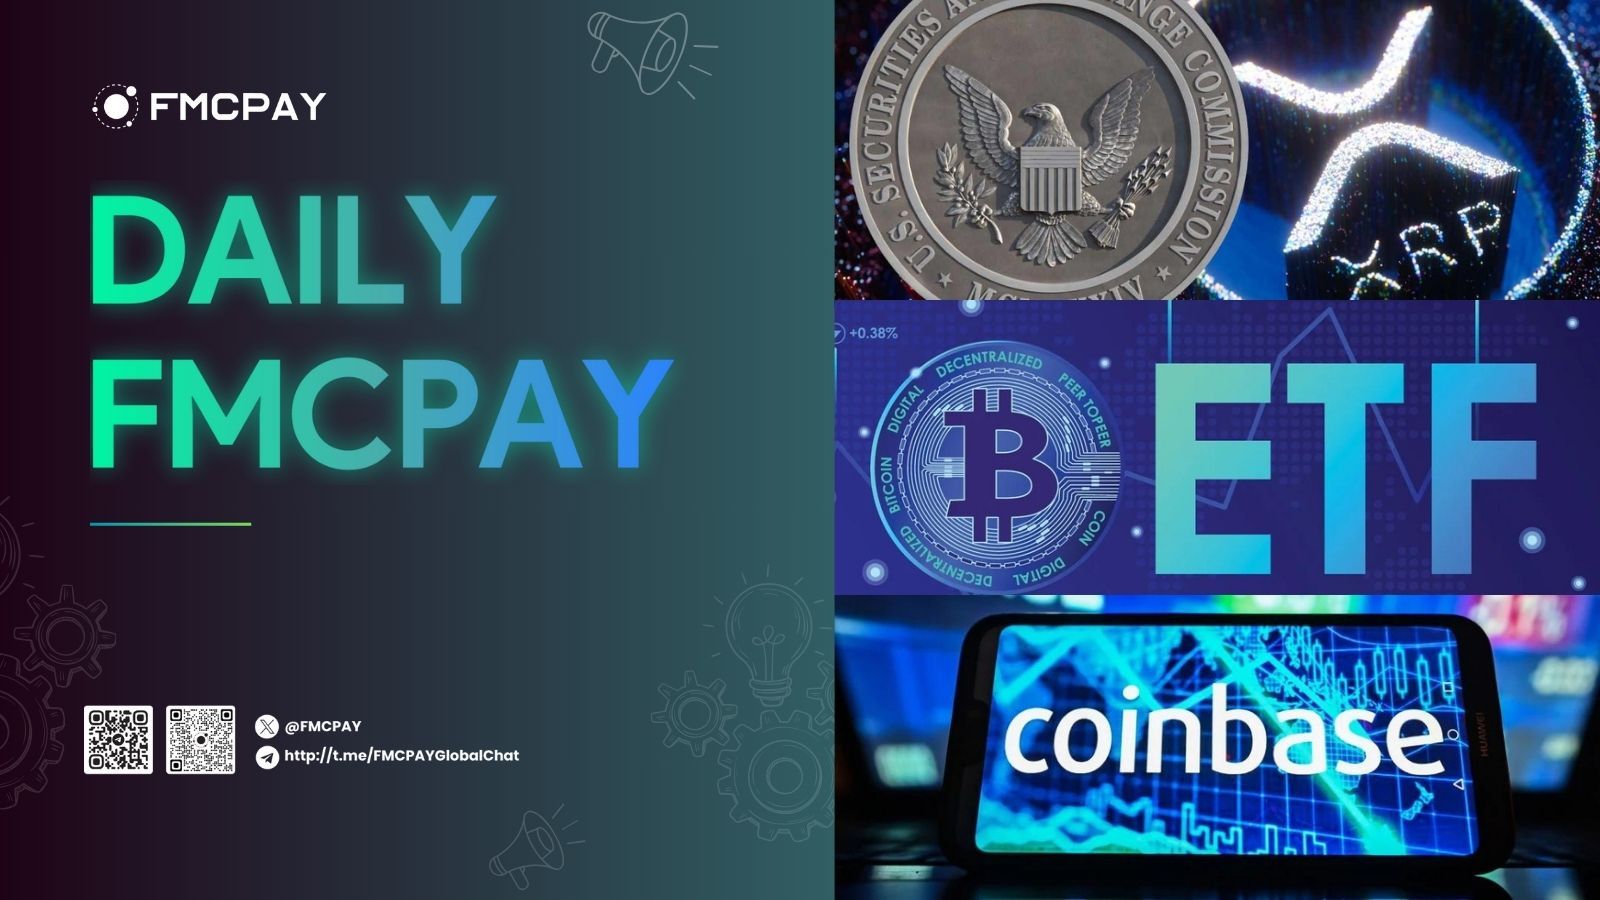 fmcpay ripple sec lawsuit sec files opposition to sealing xrp details heres everything